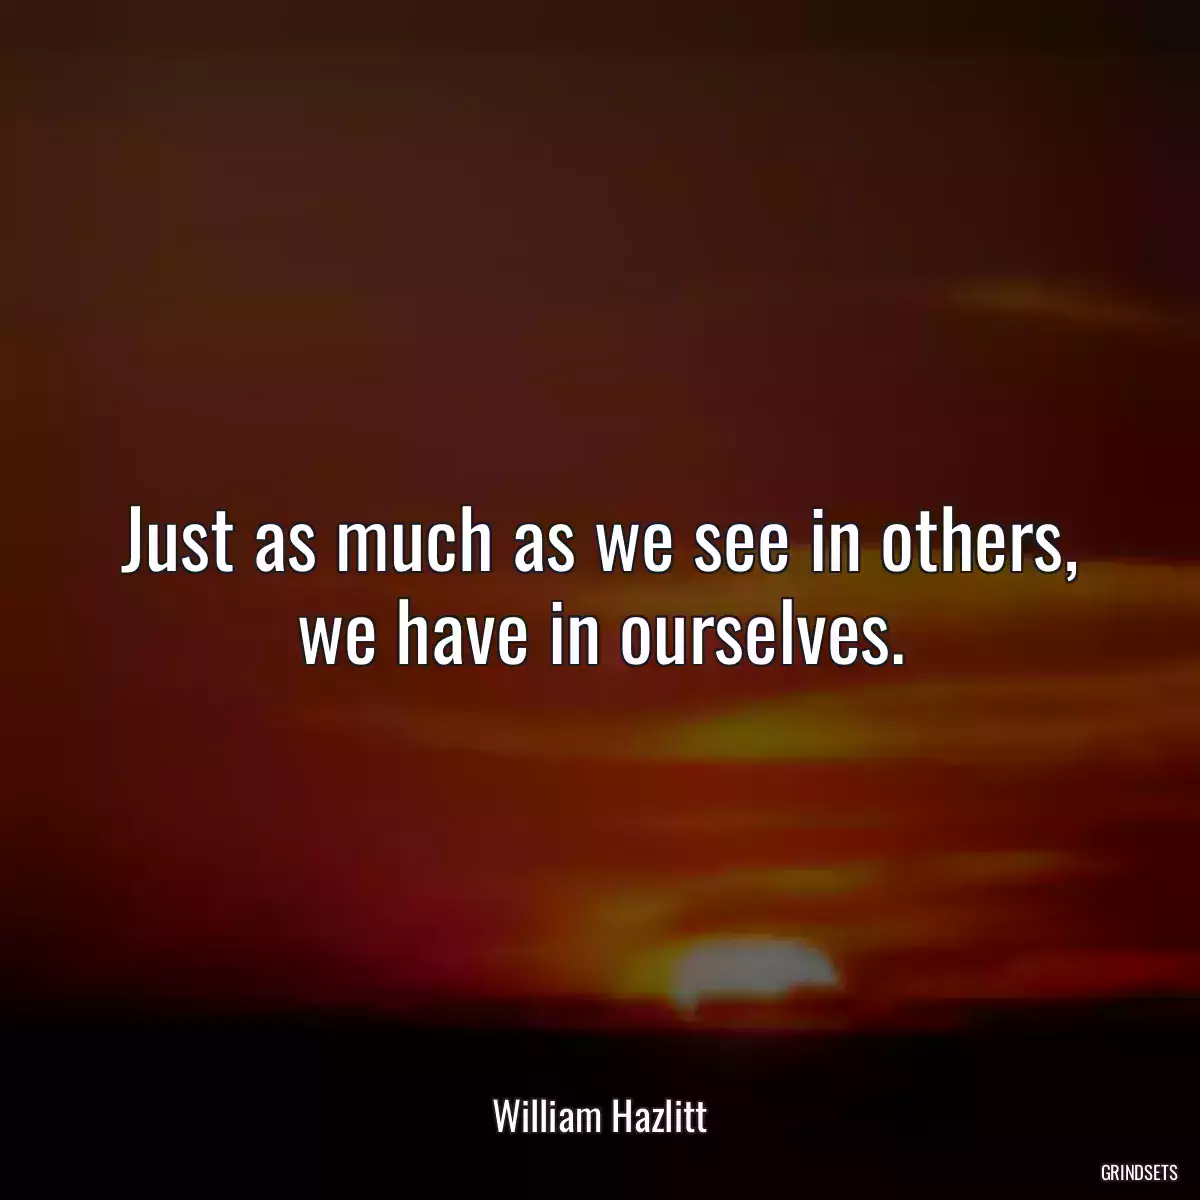 Just as much as we see in others, we have in ourselves.